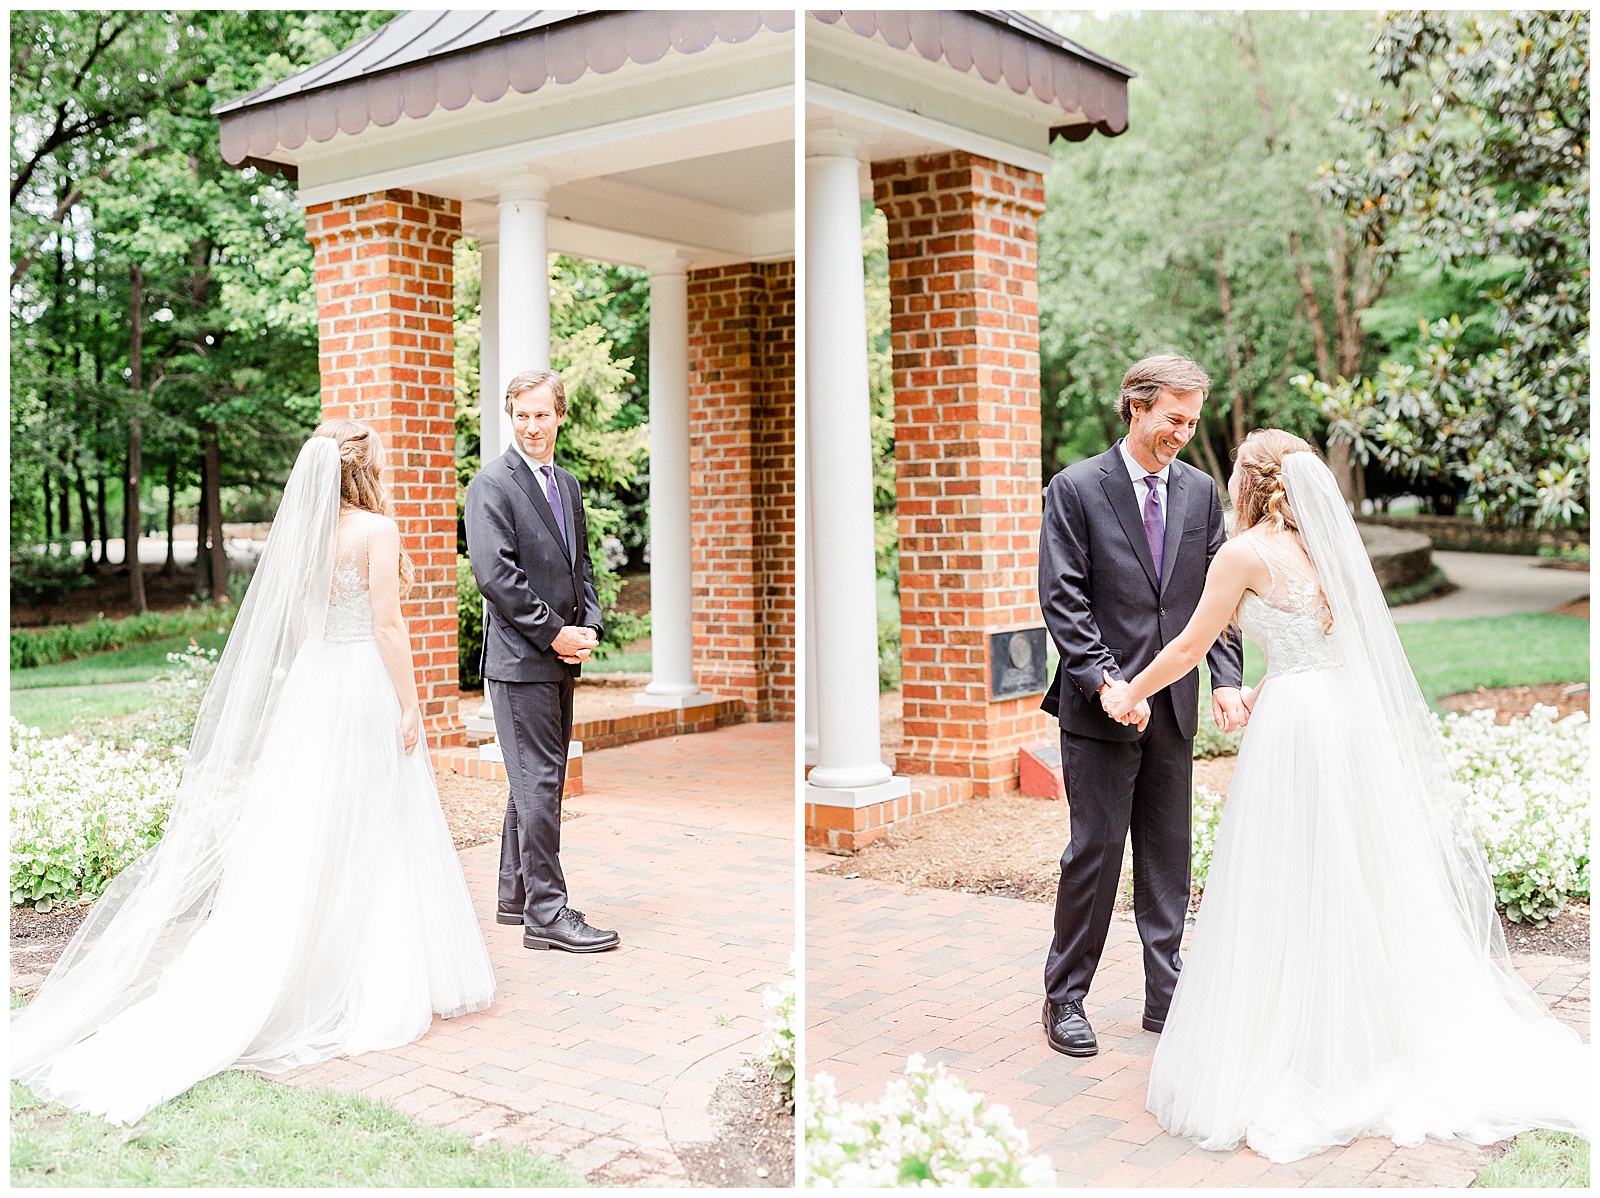 Dad’s first look at lace v-neck wedding dress from Elegant Modern Red and Navy Blue Themed Wedding in Charlotte, NC | check out the full wedding at KevynDixonPhoto.com